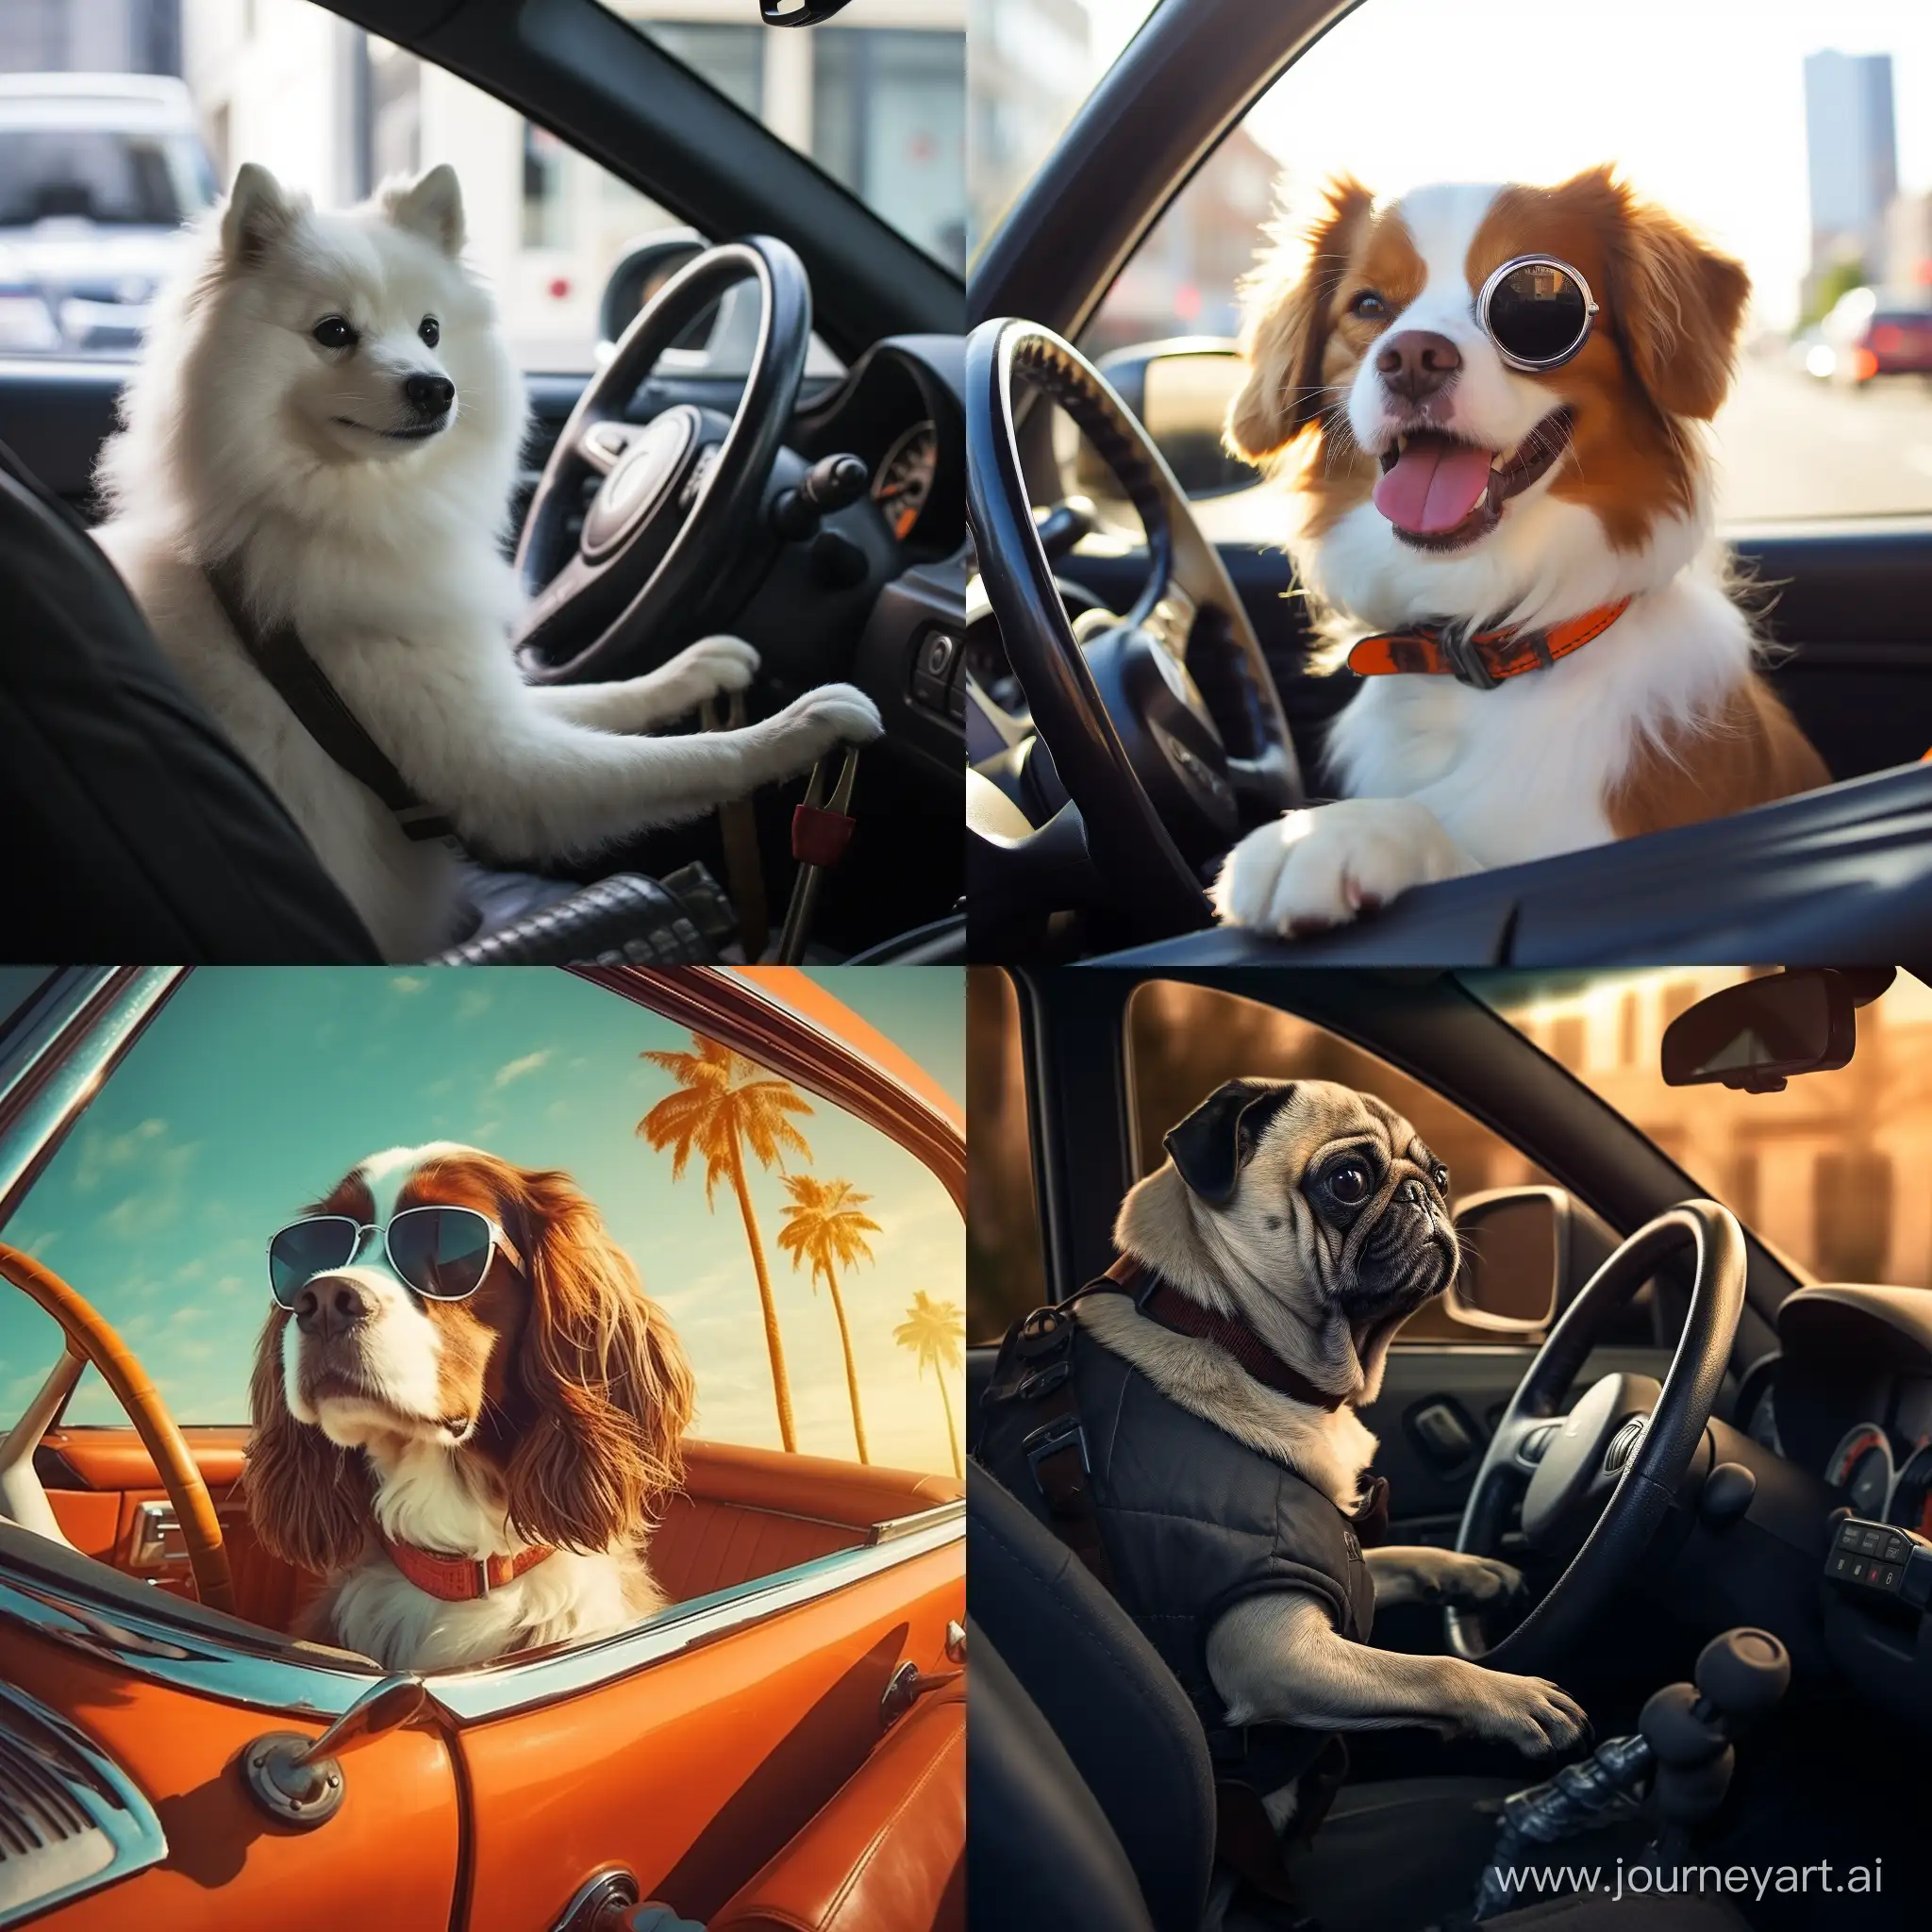 Adorable-Dog-Behind-the-Wheel-Quirky-Canine-Driving-Adventure